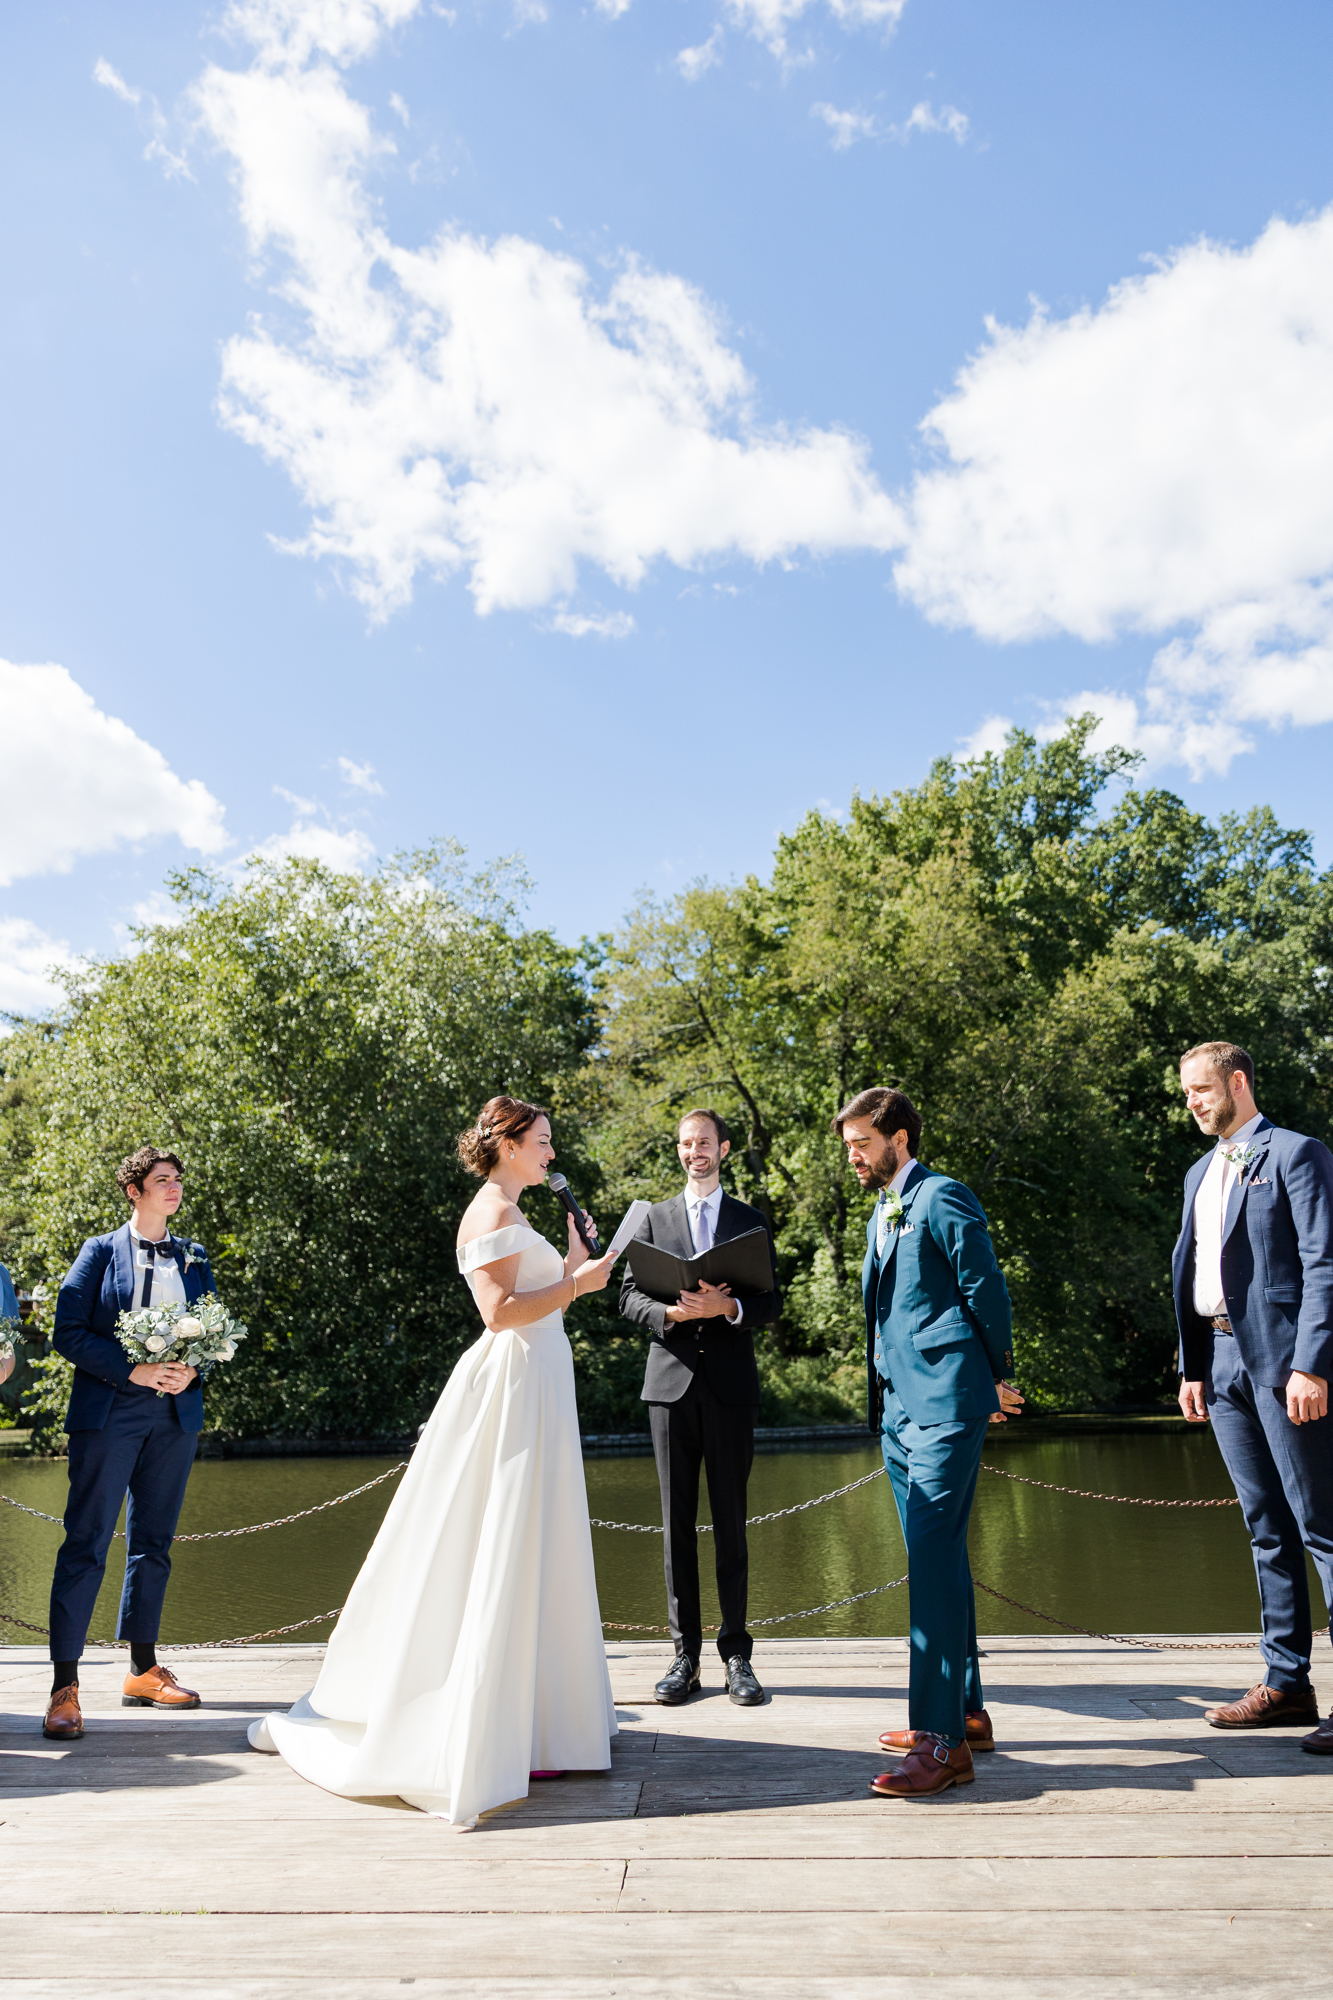 Classic Fall Prospect Park Wedding Photos at the Boathouse